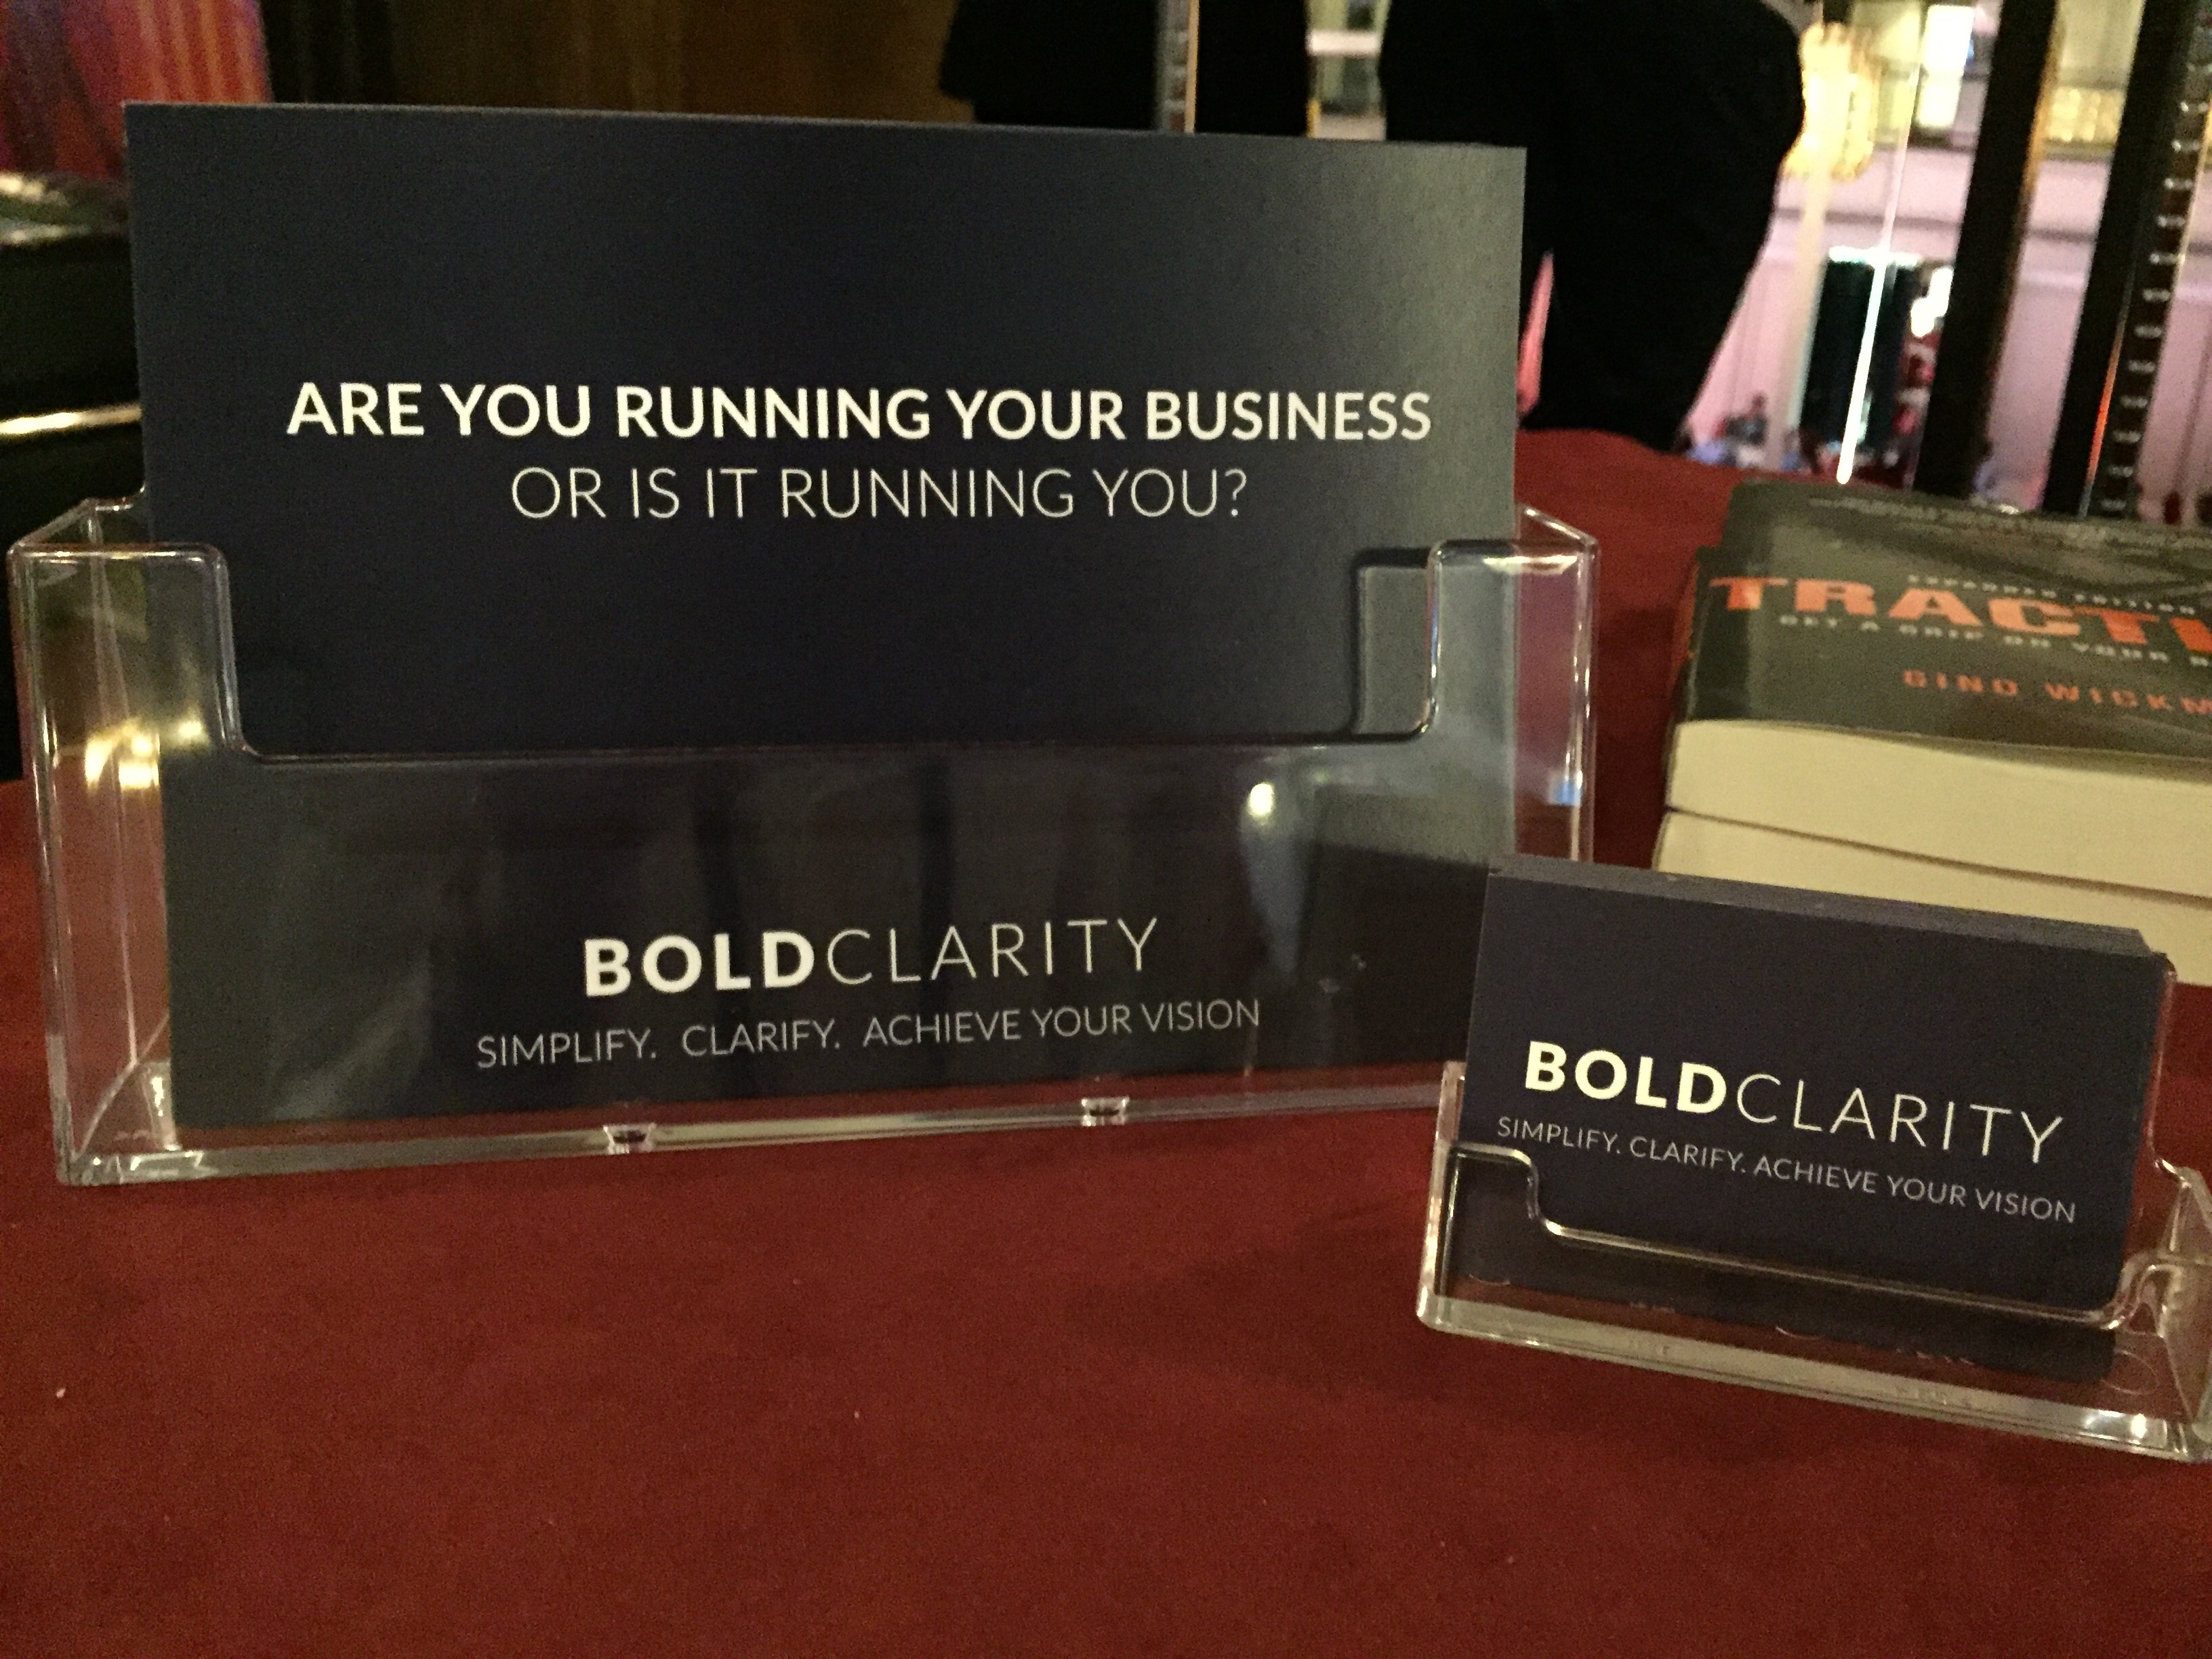 Are you running your business or is it running you?